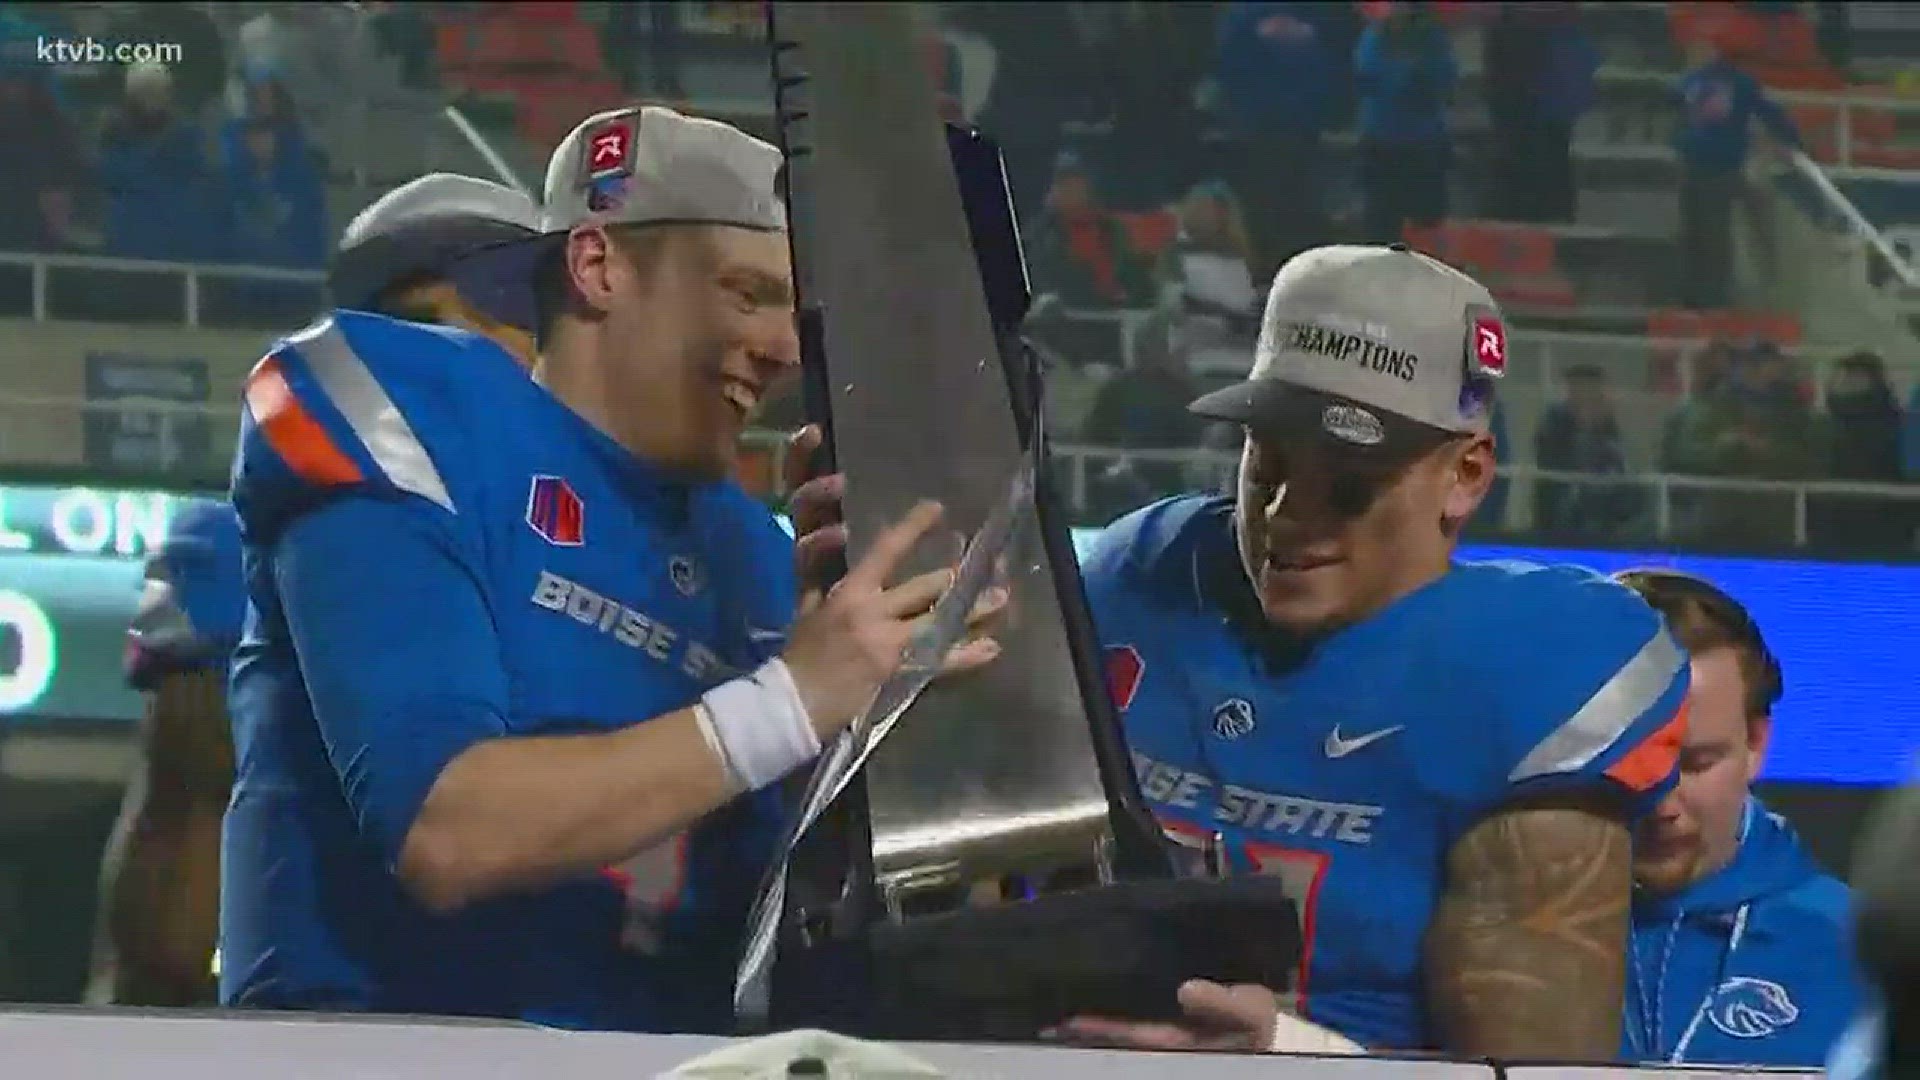 Boise State beats Fresno State in the 2017 Mountain West Football Championship